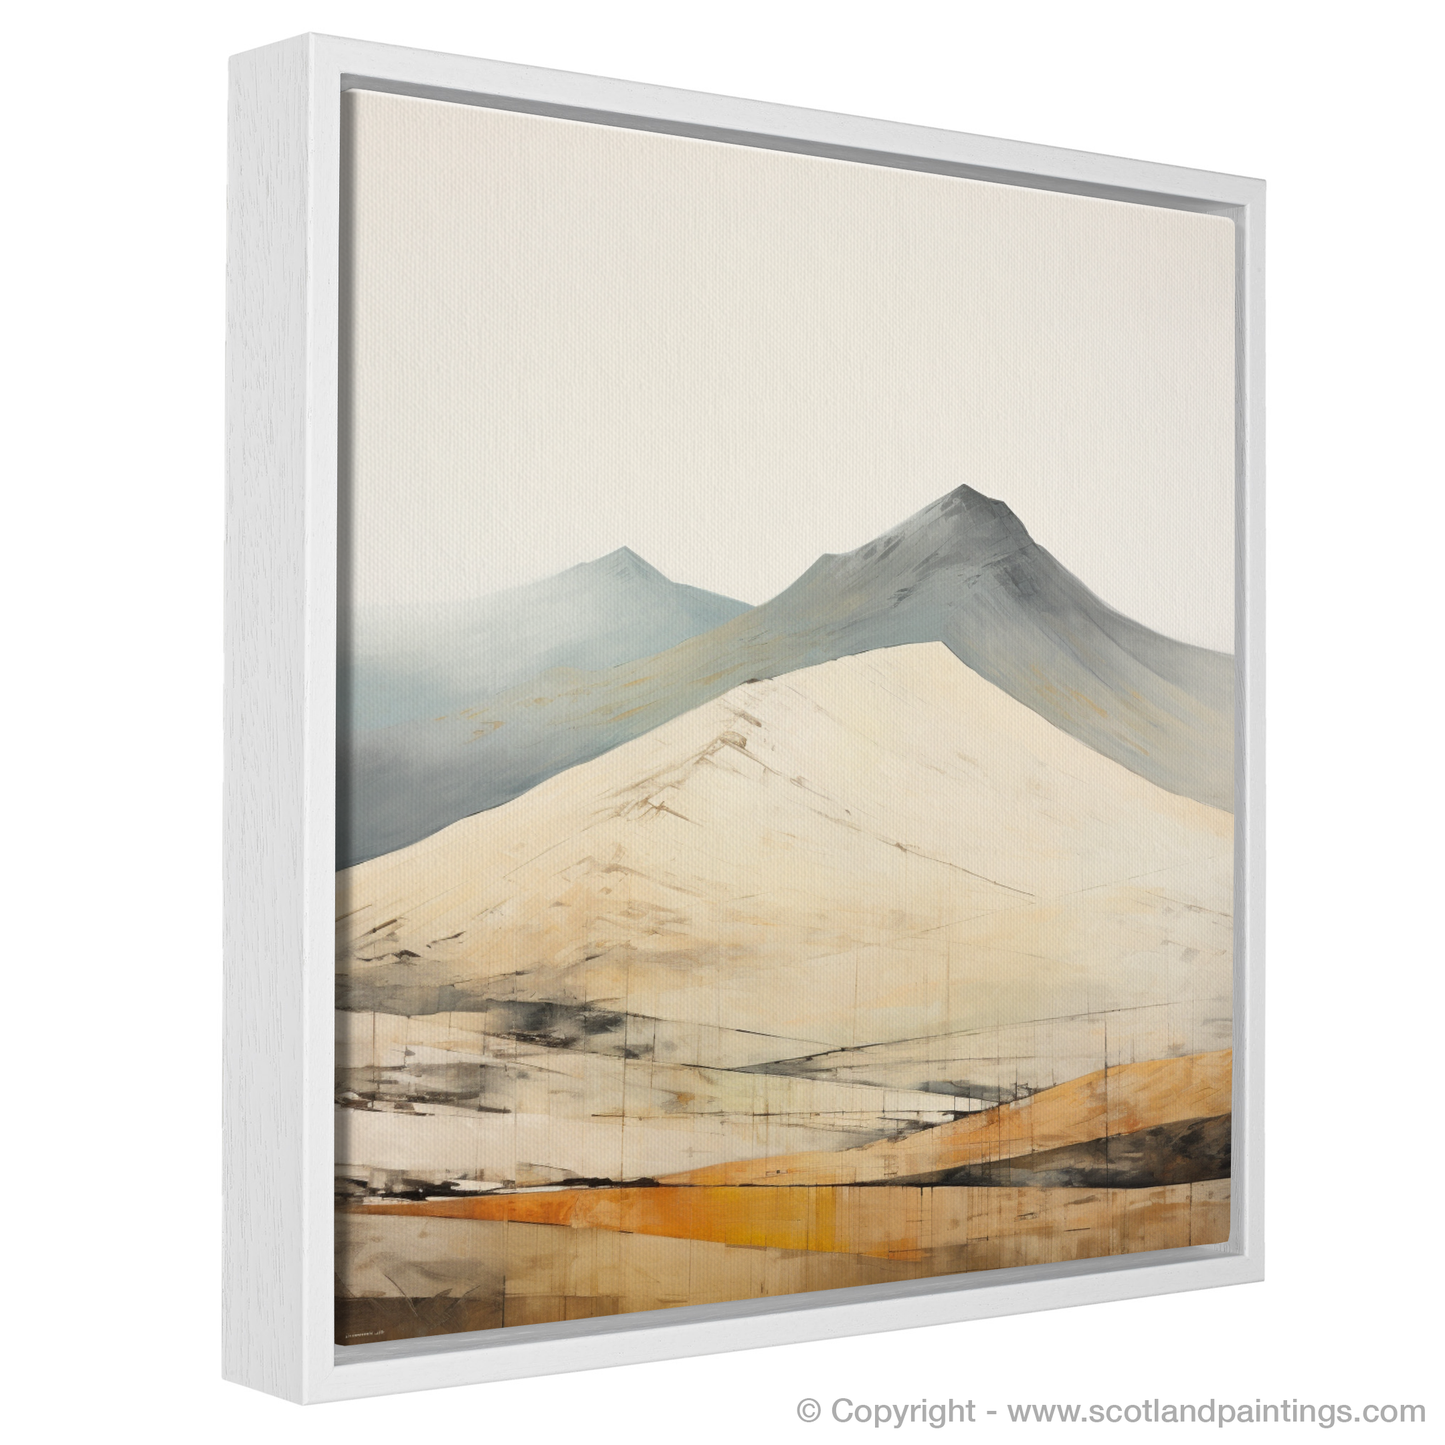 Painting and Art Print of Ben Lawers entitled "Abstract Essence of Ben Lawers".